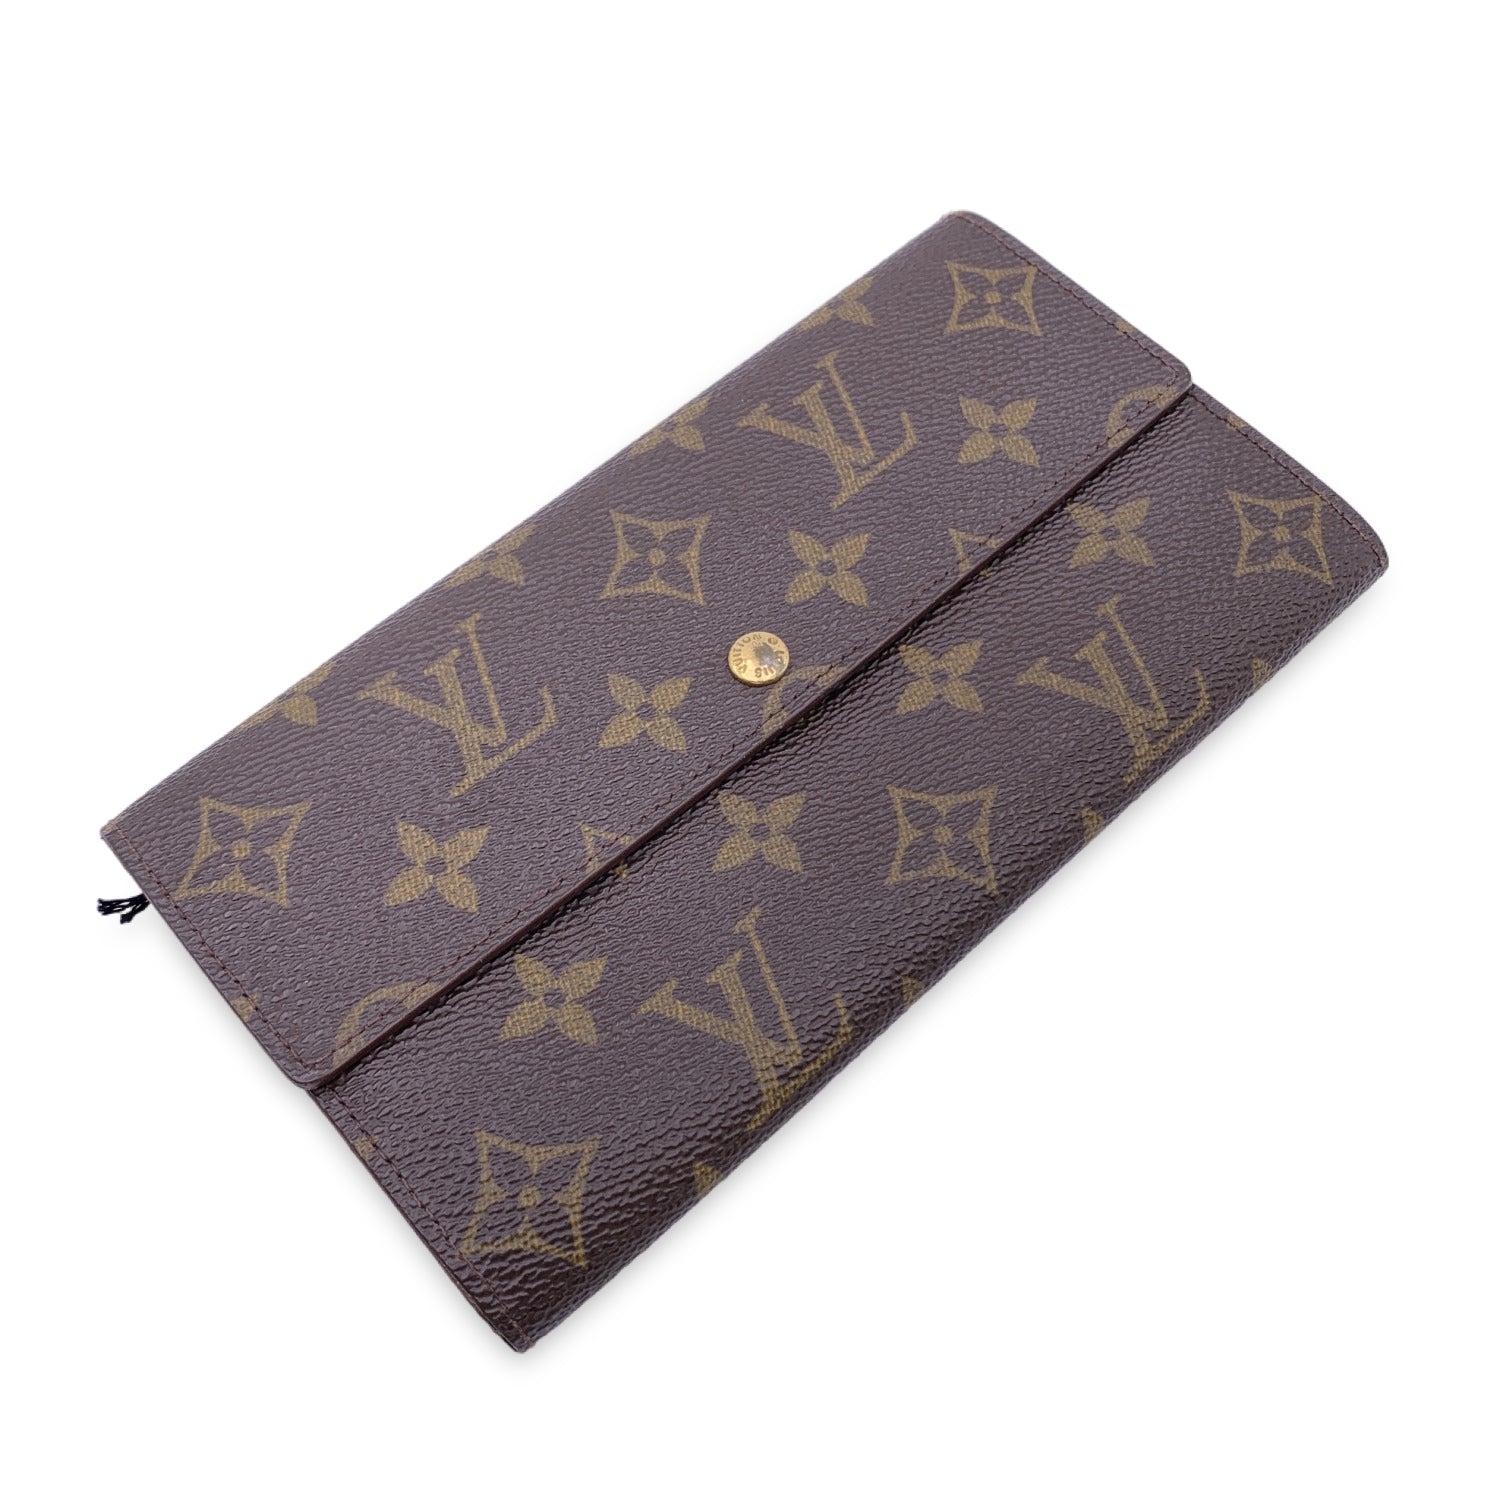 Louis Vuitton 'Sarah' wallet, in brown monogram canvas. Interior fully lined in leather. Flap with snap closure. 2 open pockets under the flap. 1 coin compartment with zip closure. 2 bill compartments. 'LOUIS VUITTON Paris - Made in France' engraved